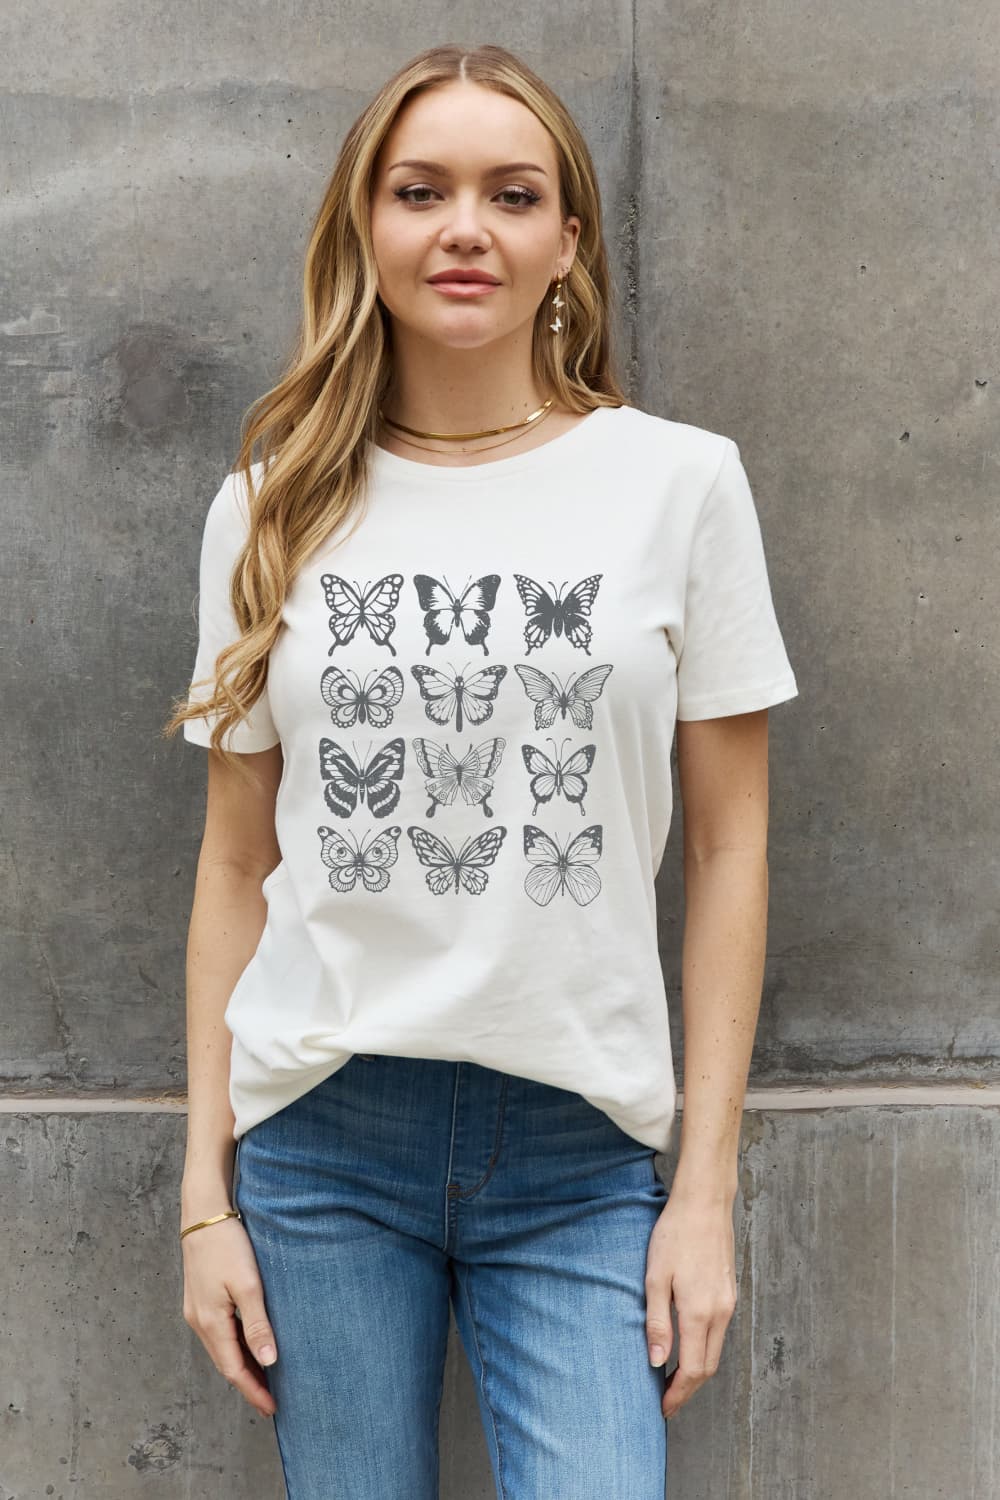 Slate Gray Simply Love Butterfly Graphic Cotton T-Shirt